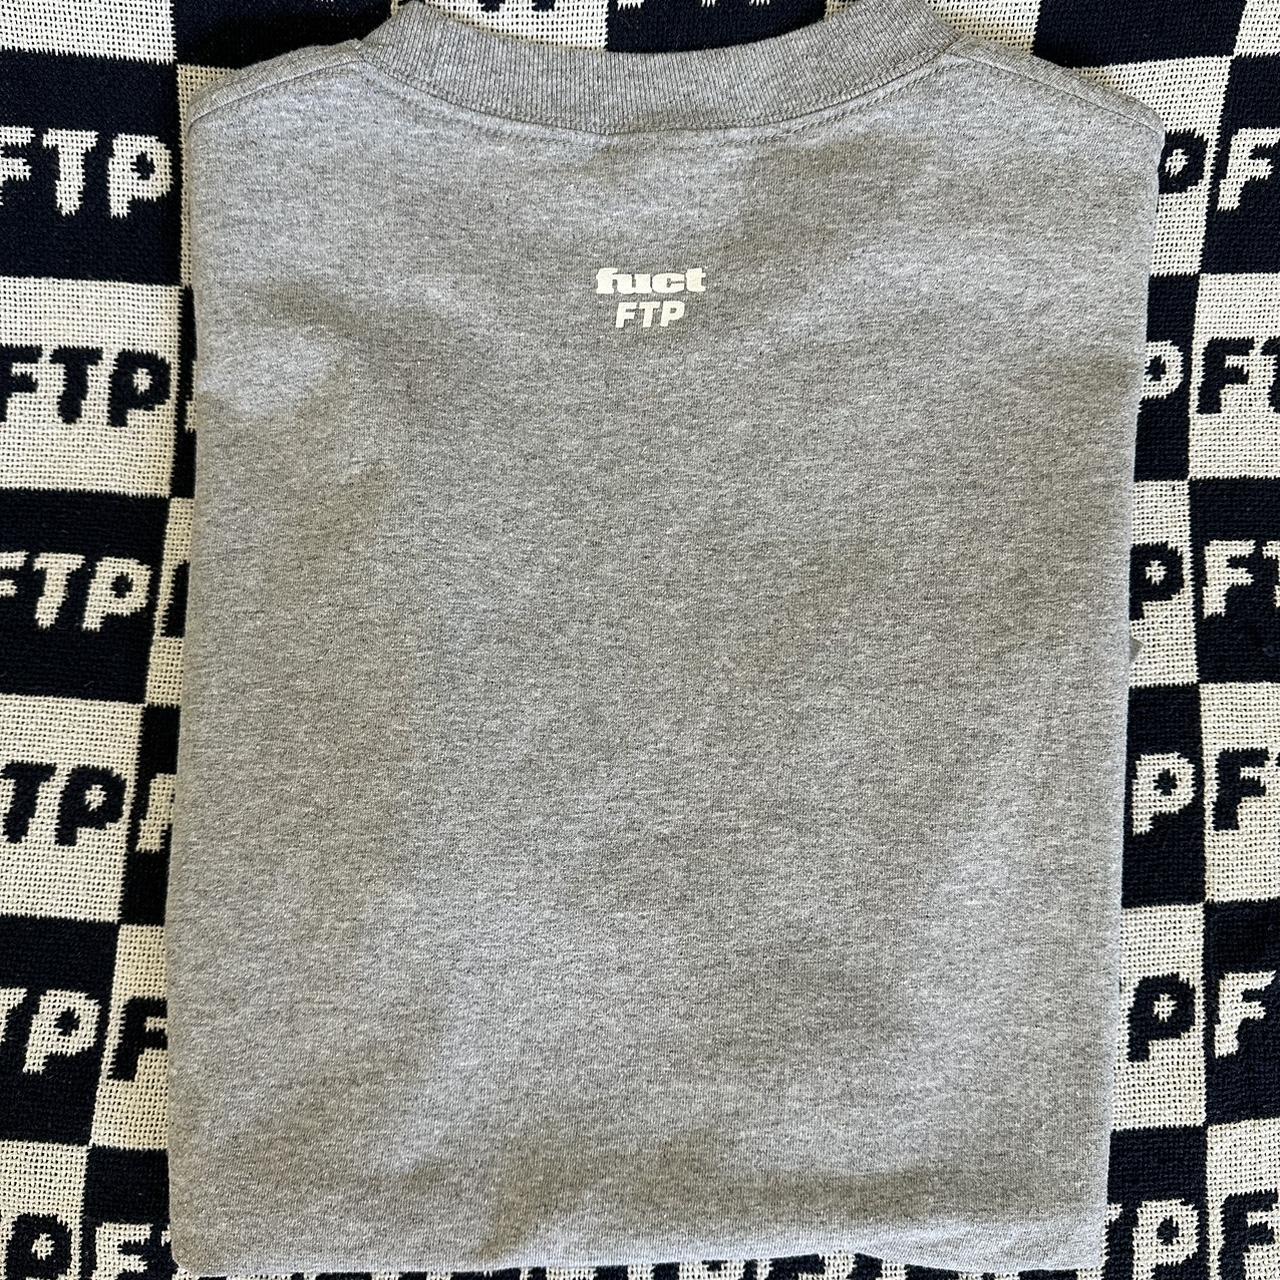 FTP x FUCT FIGHT CRIME TEE RELEASED: 2017 SIZE:... - Depop